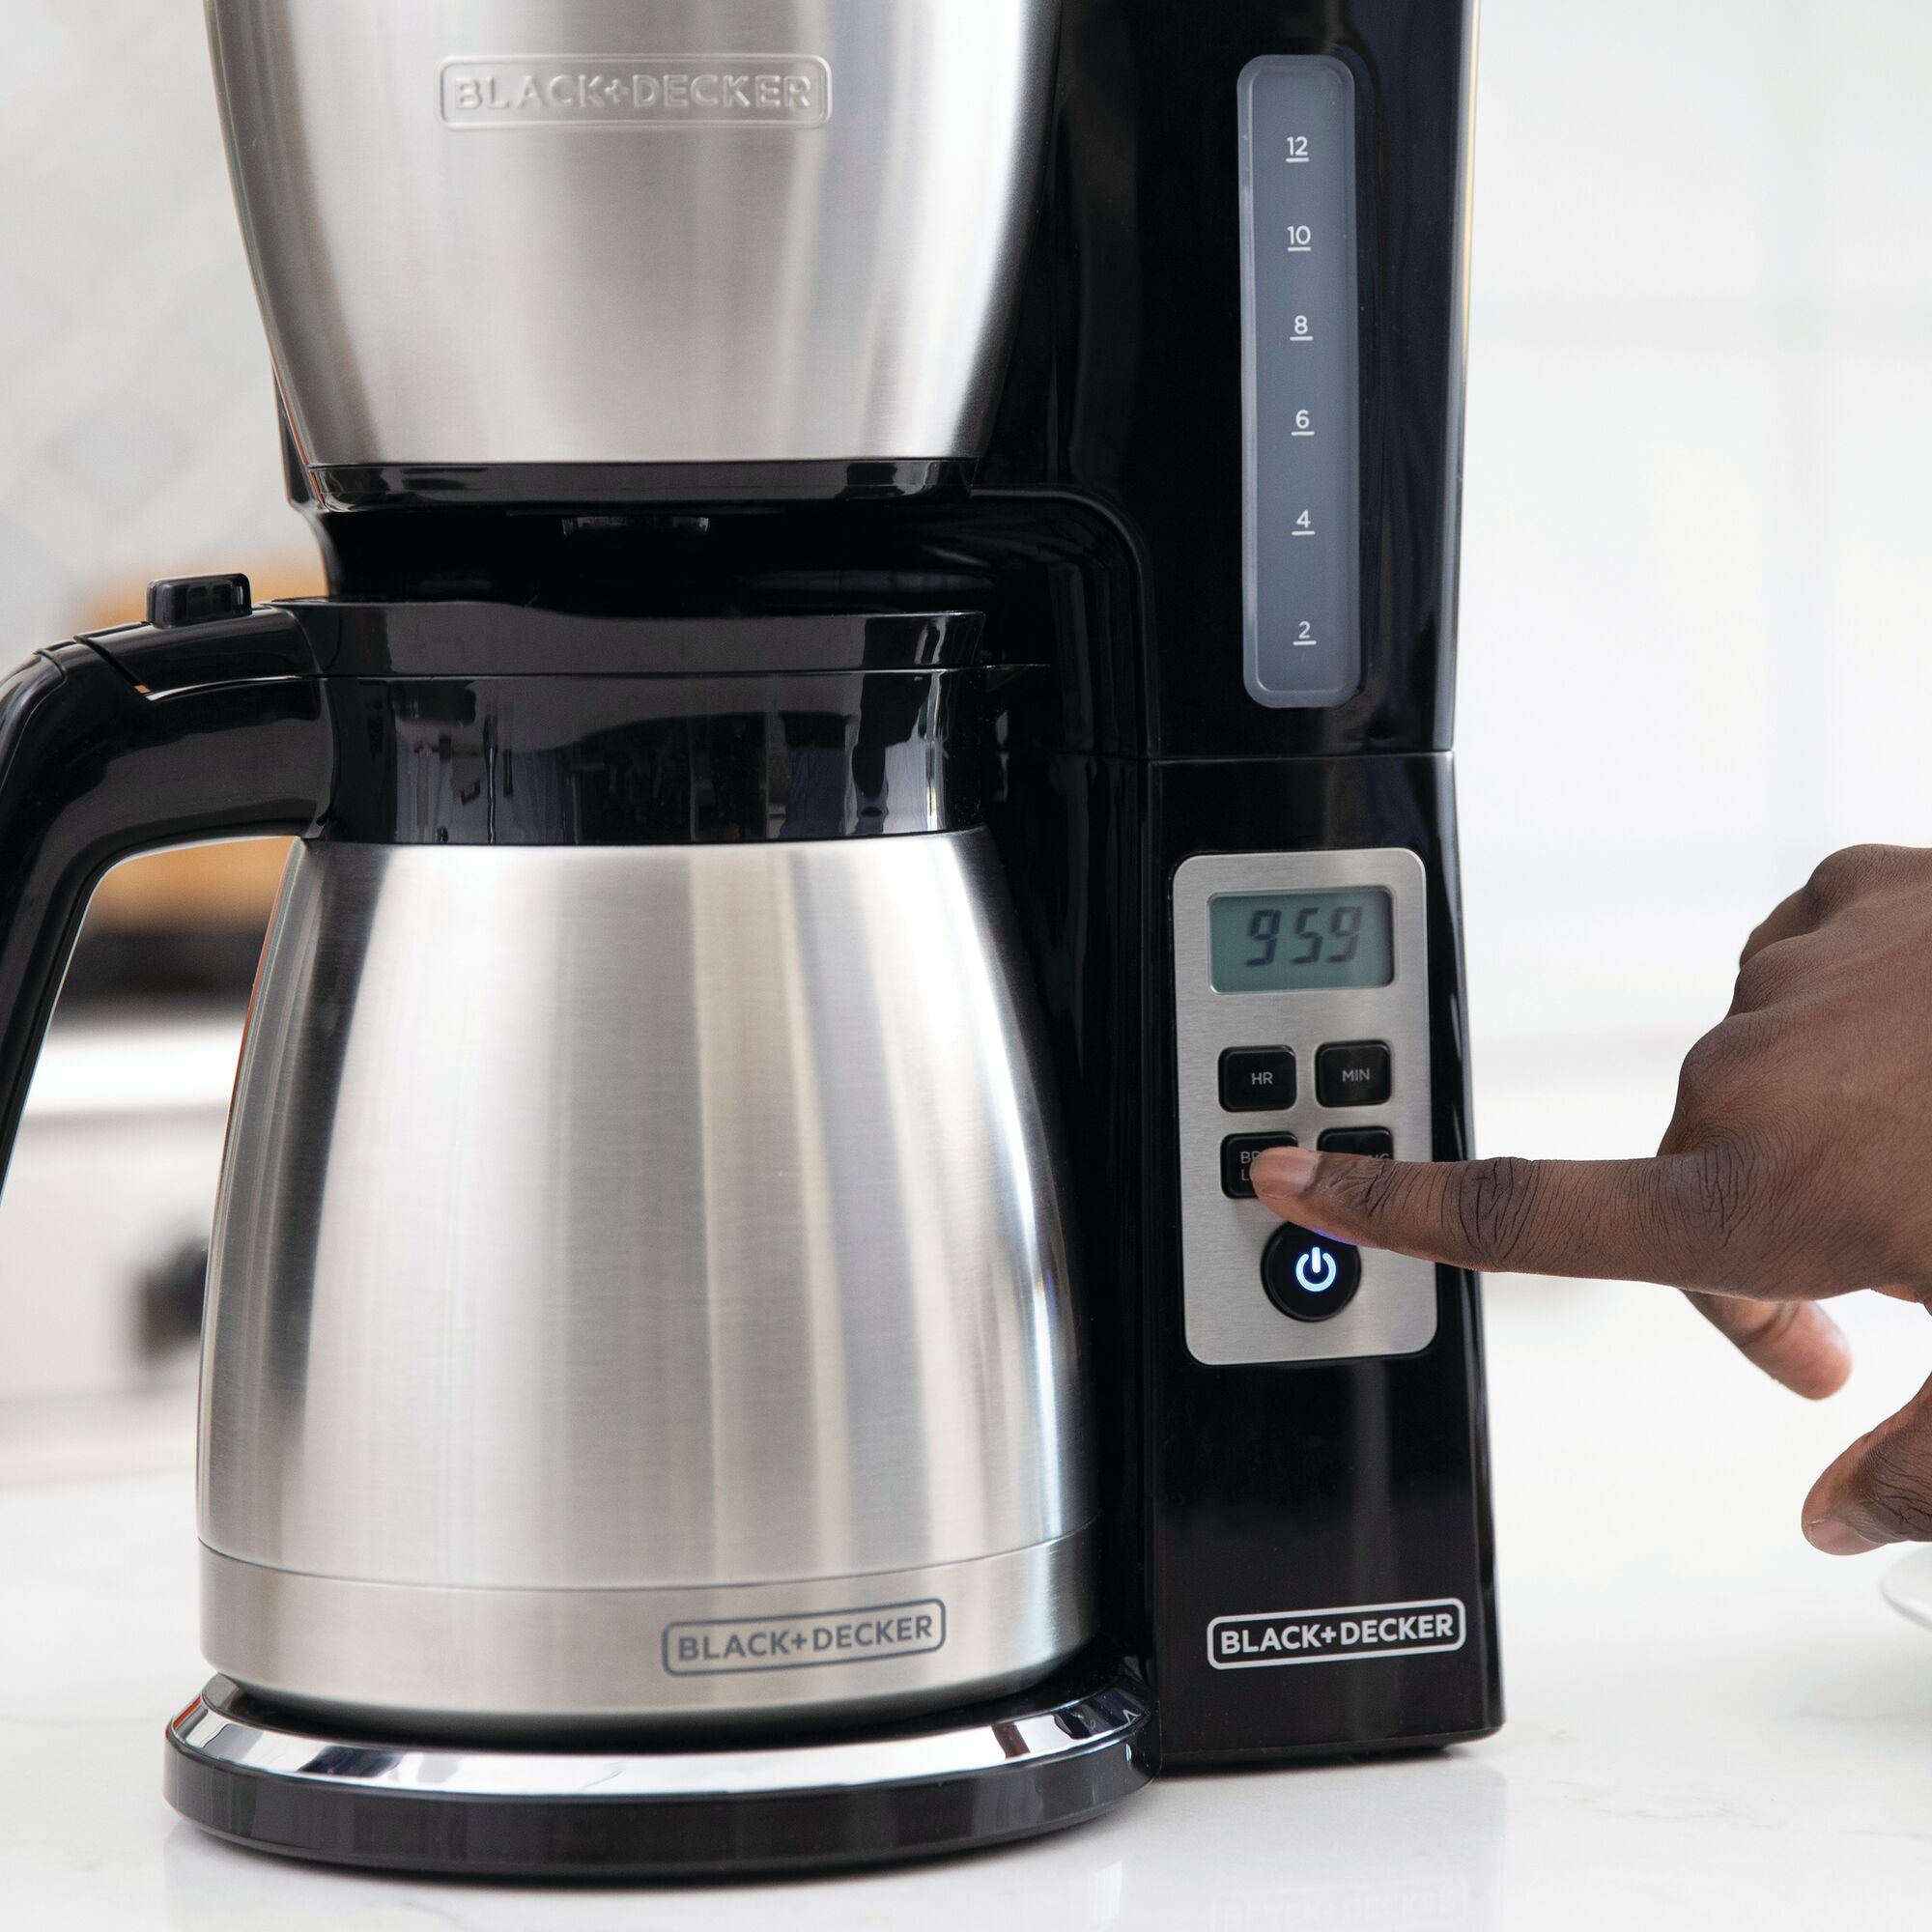 Black+Decker Thermal Coffeemaker Review: A Good Buy for Most